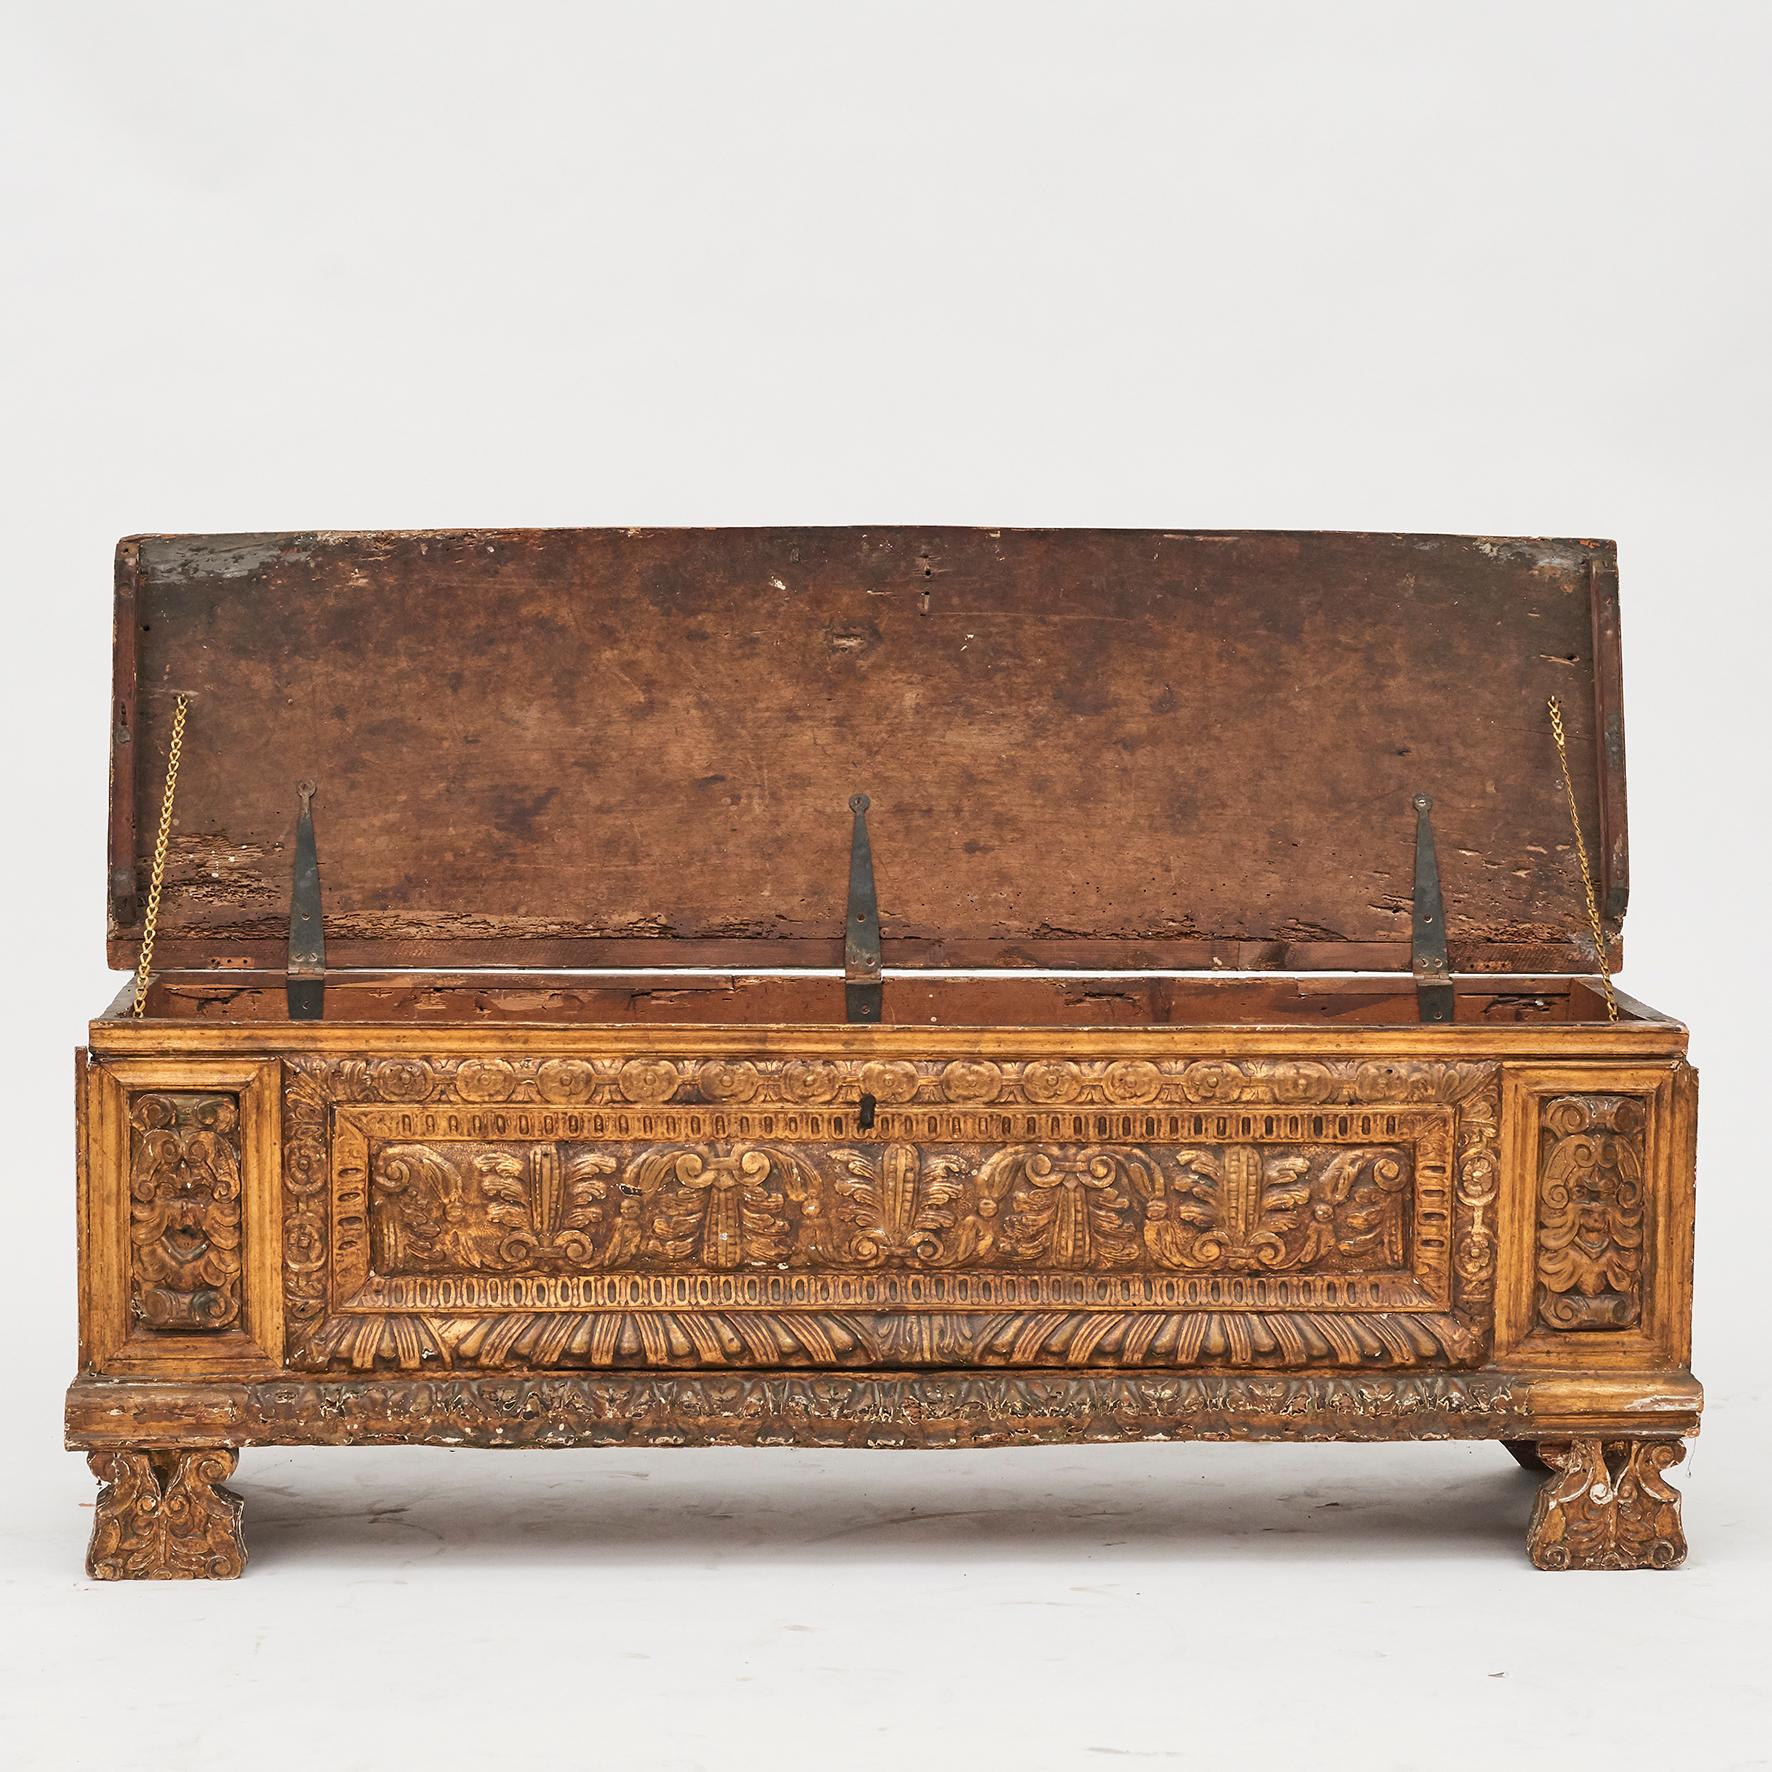 Italian Renaissance cassone / wedding chest, Italy (presumably from Bologna), 1500-1600. It features a gorgeous hand carved front panel with original gildings.
Appears untouched and in original condition.
This wonderful antique cassone will